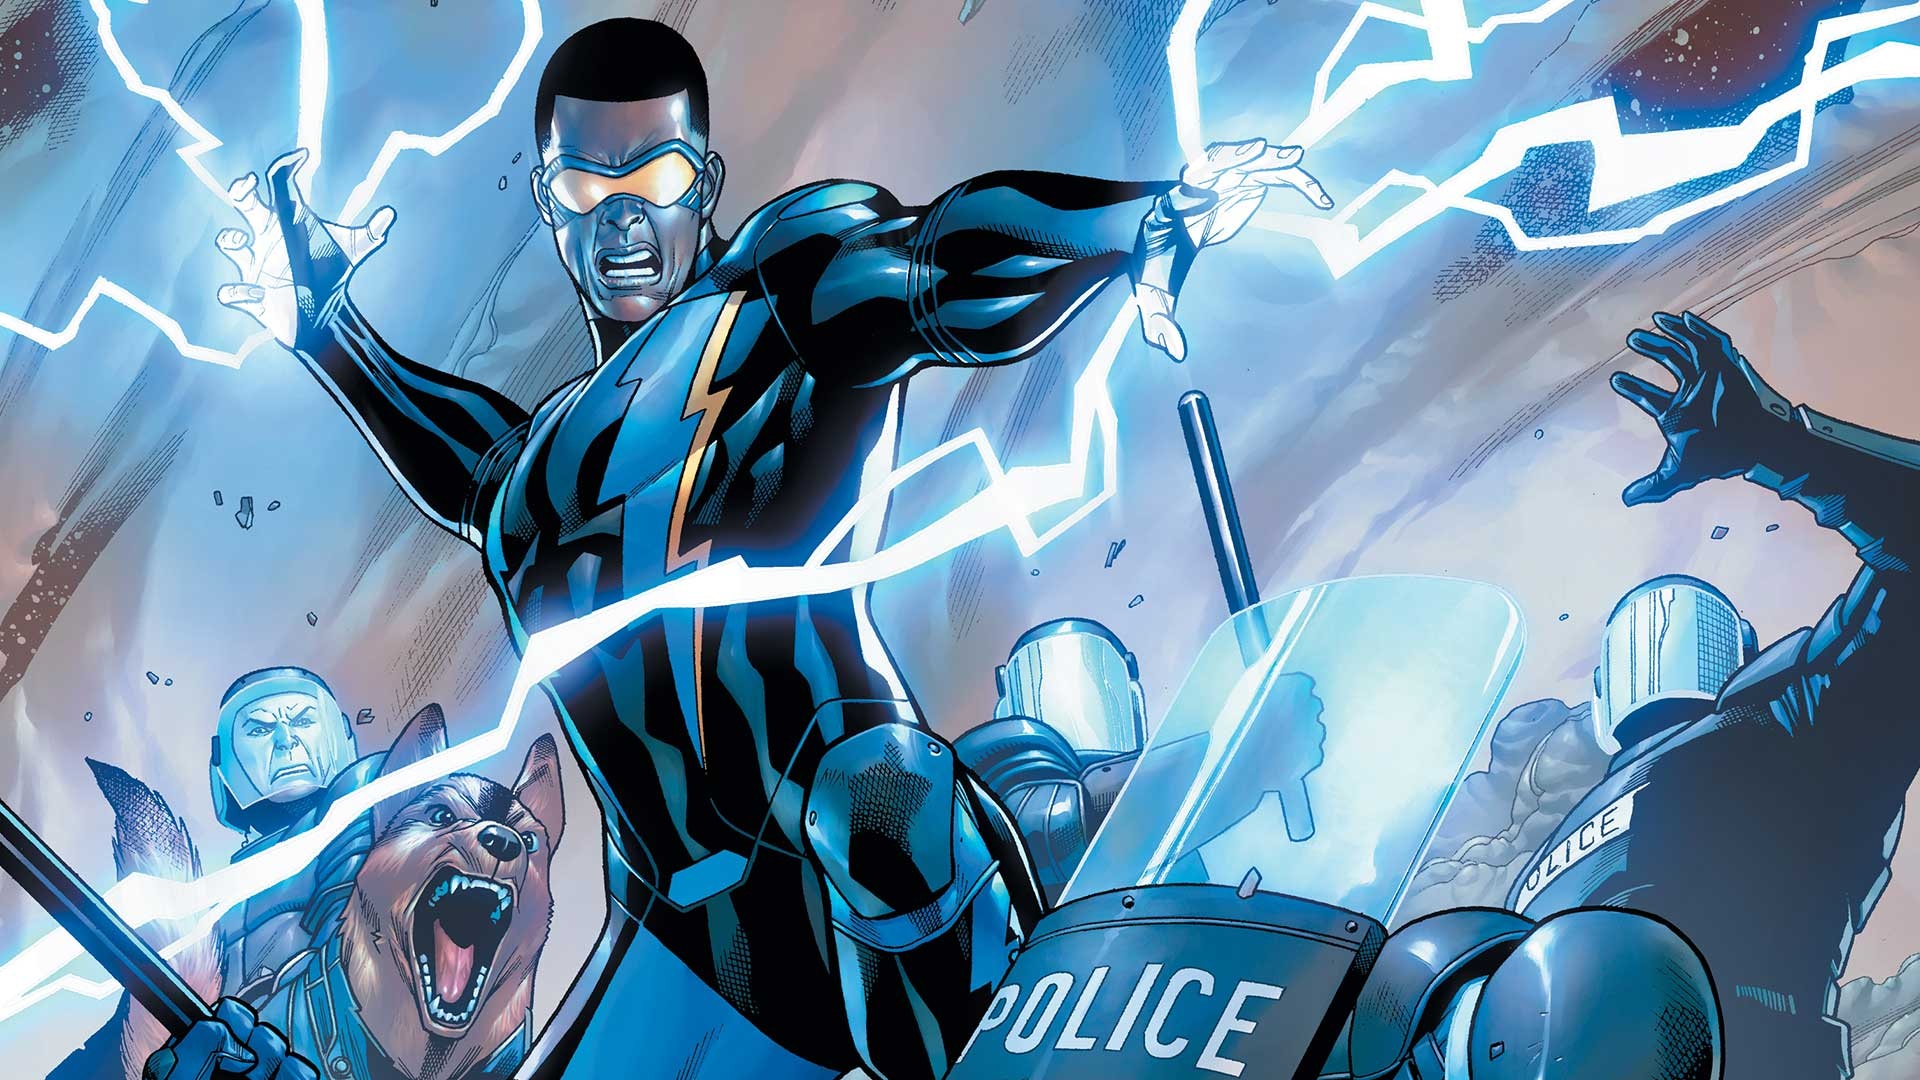 How are Black Lightning's powers different from Static Shock's?